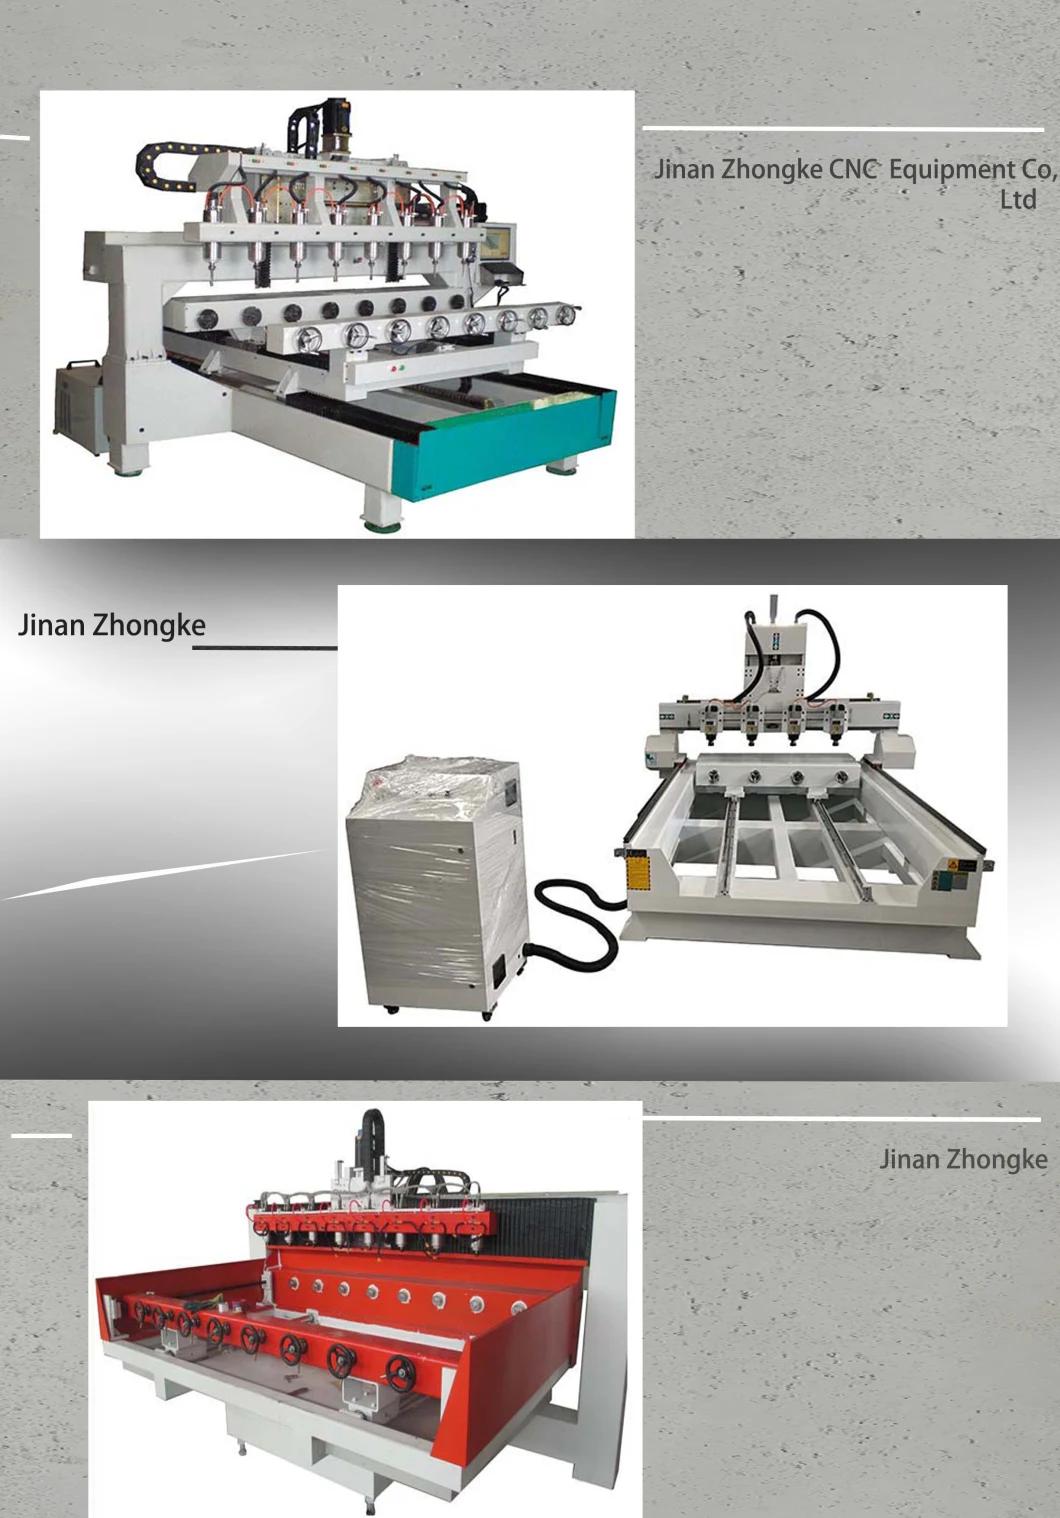 4 Axis Machine 3D CNC Wood Router Manufacturer of Wood Carving Machine Woodworking Machinery